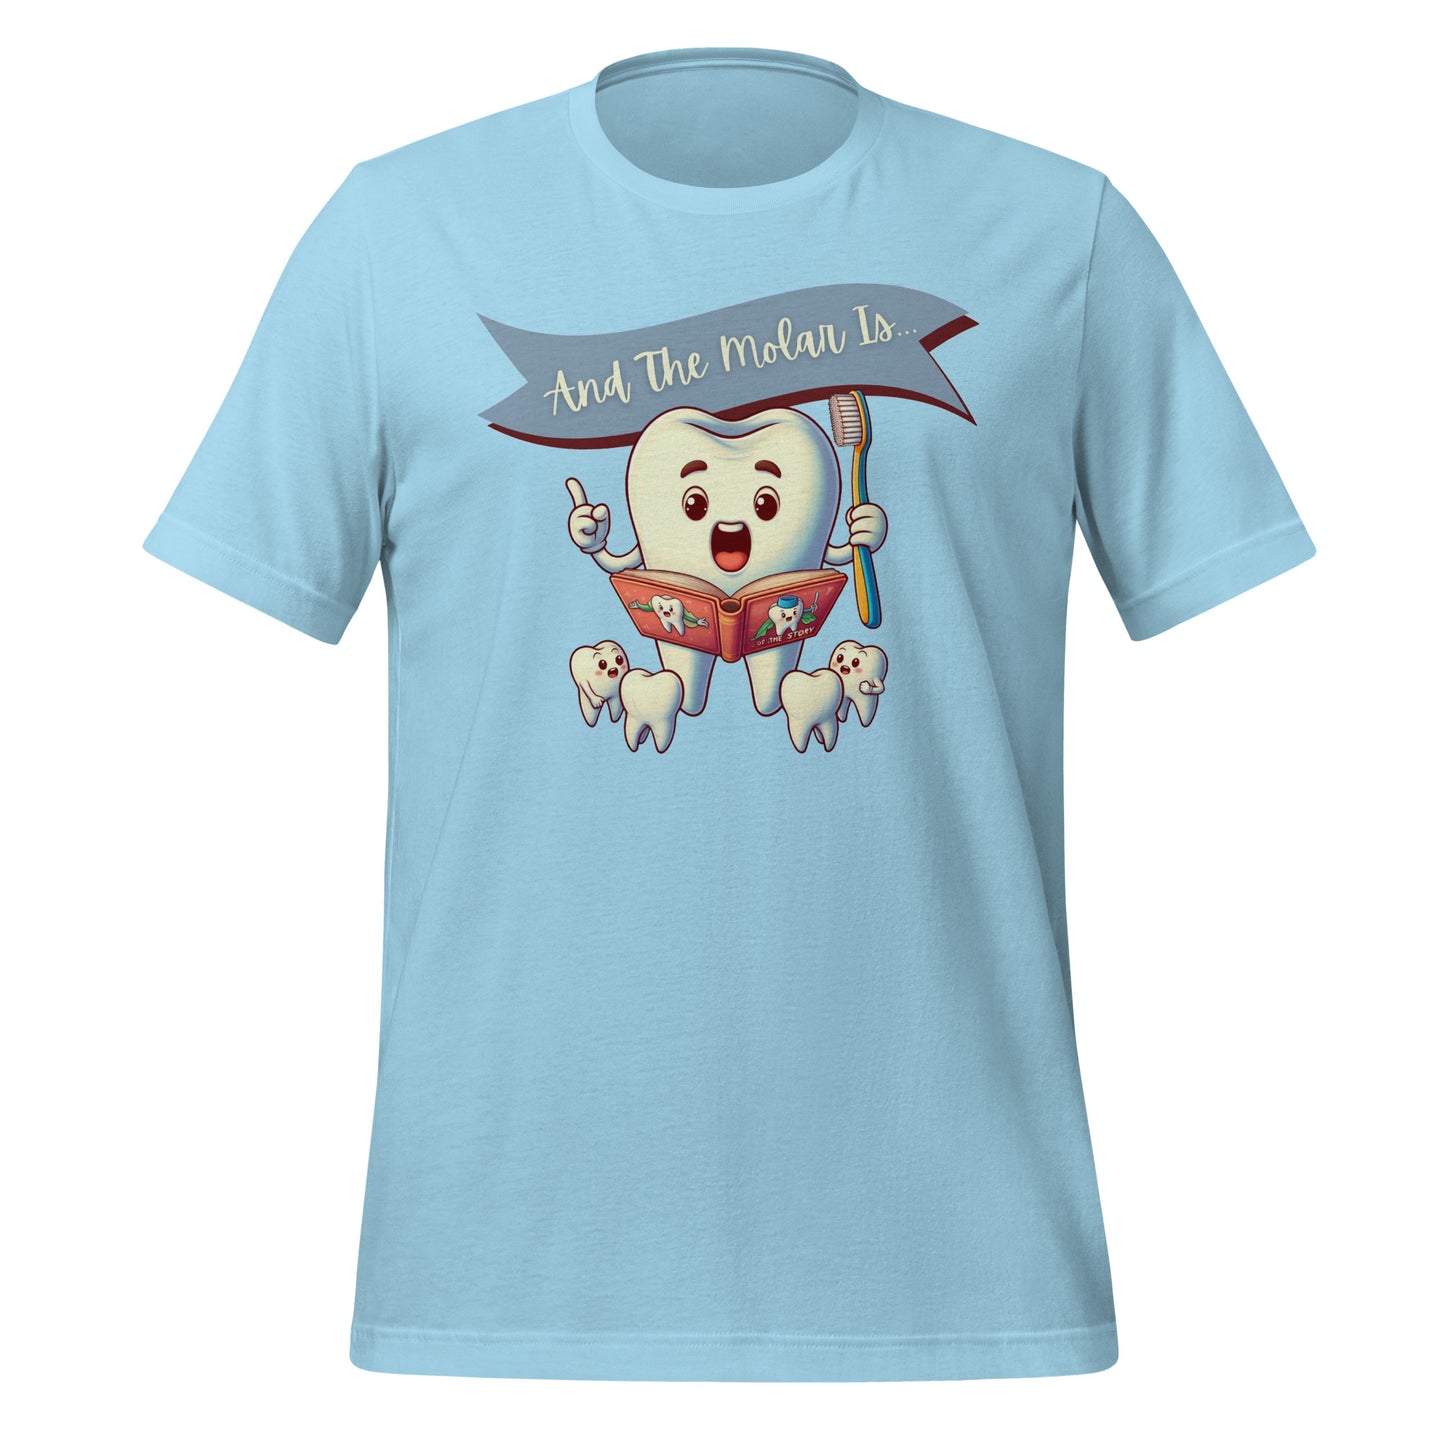 Cute dental shirt featuring a smiling tooth character reading a book with the caption ‘And The Molar Is,’ surrounded by smaller tooth characters. Ocean blue color.